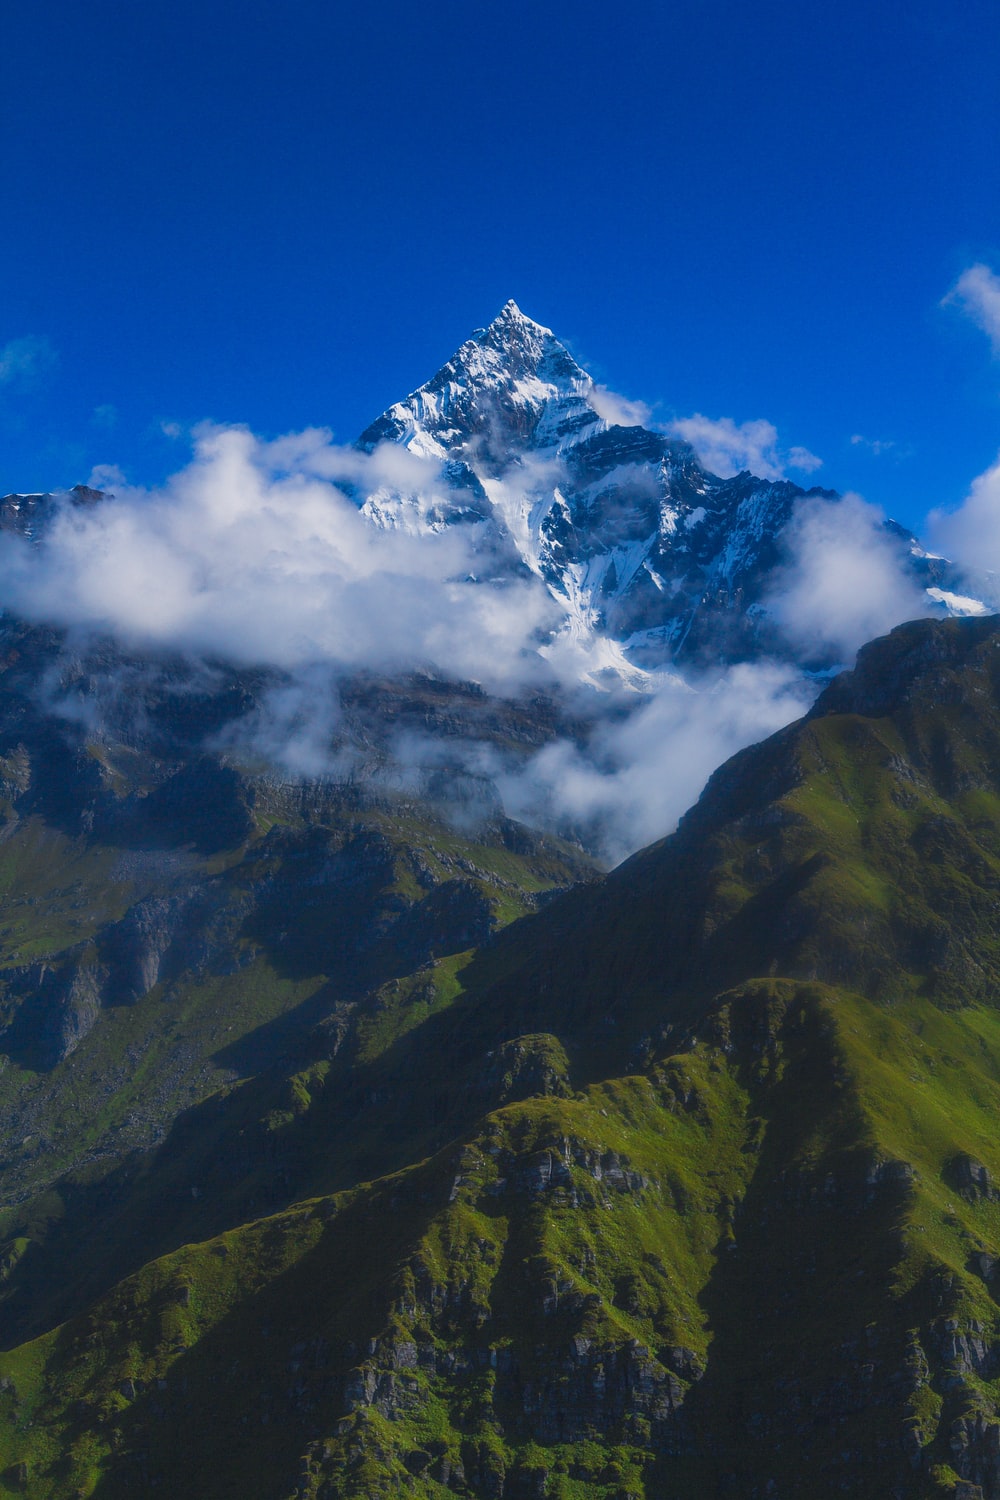 Nepal Mountain Picture. Download Free Image